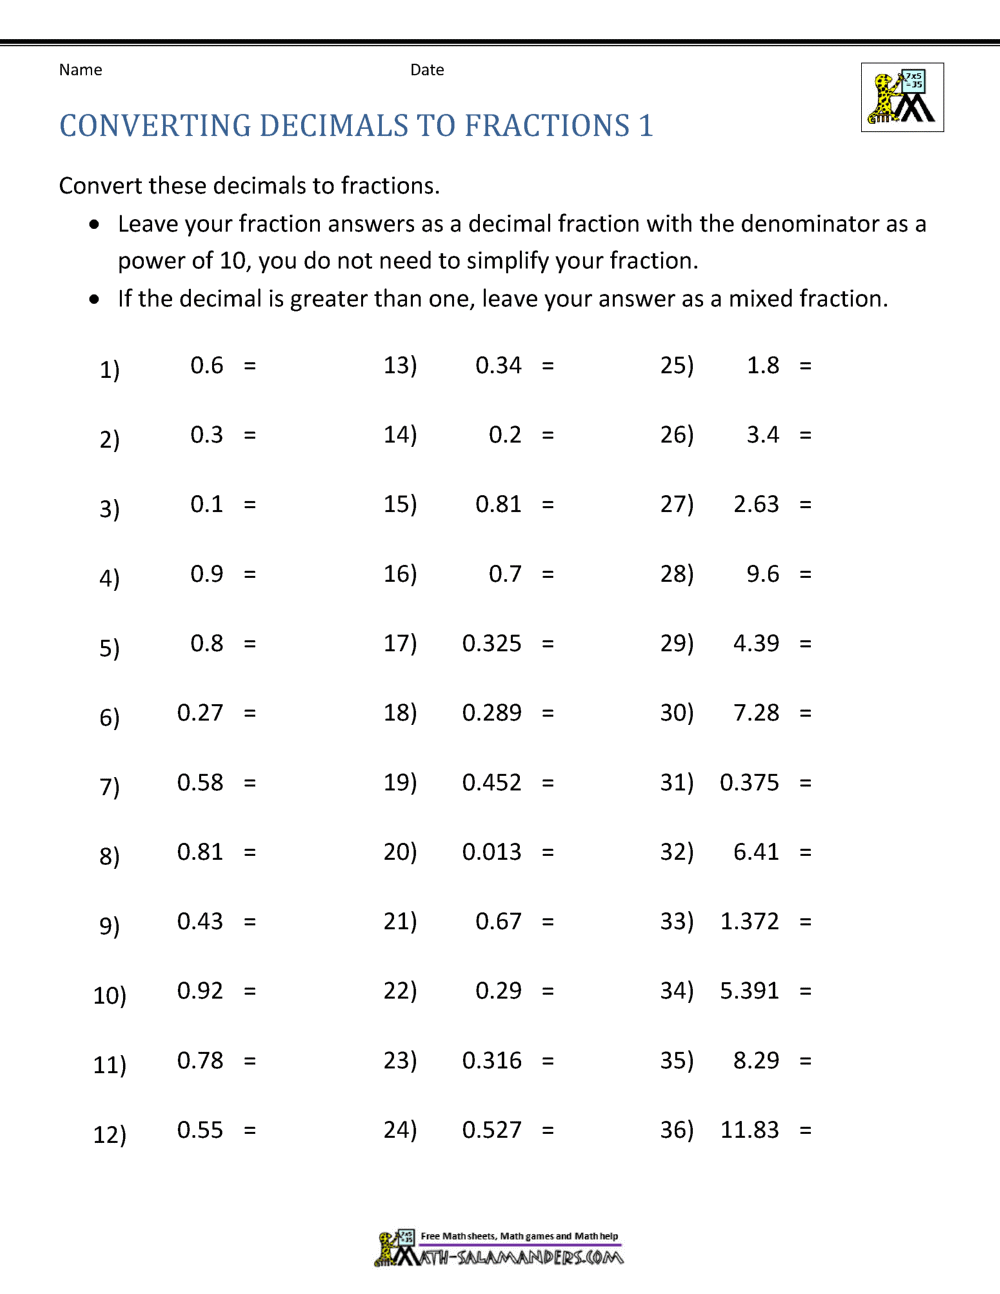 my homework lesson 5 decimals and fractions page 661